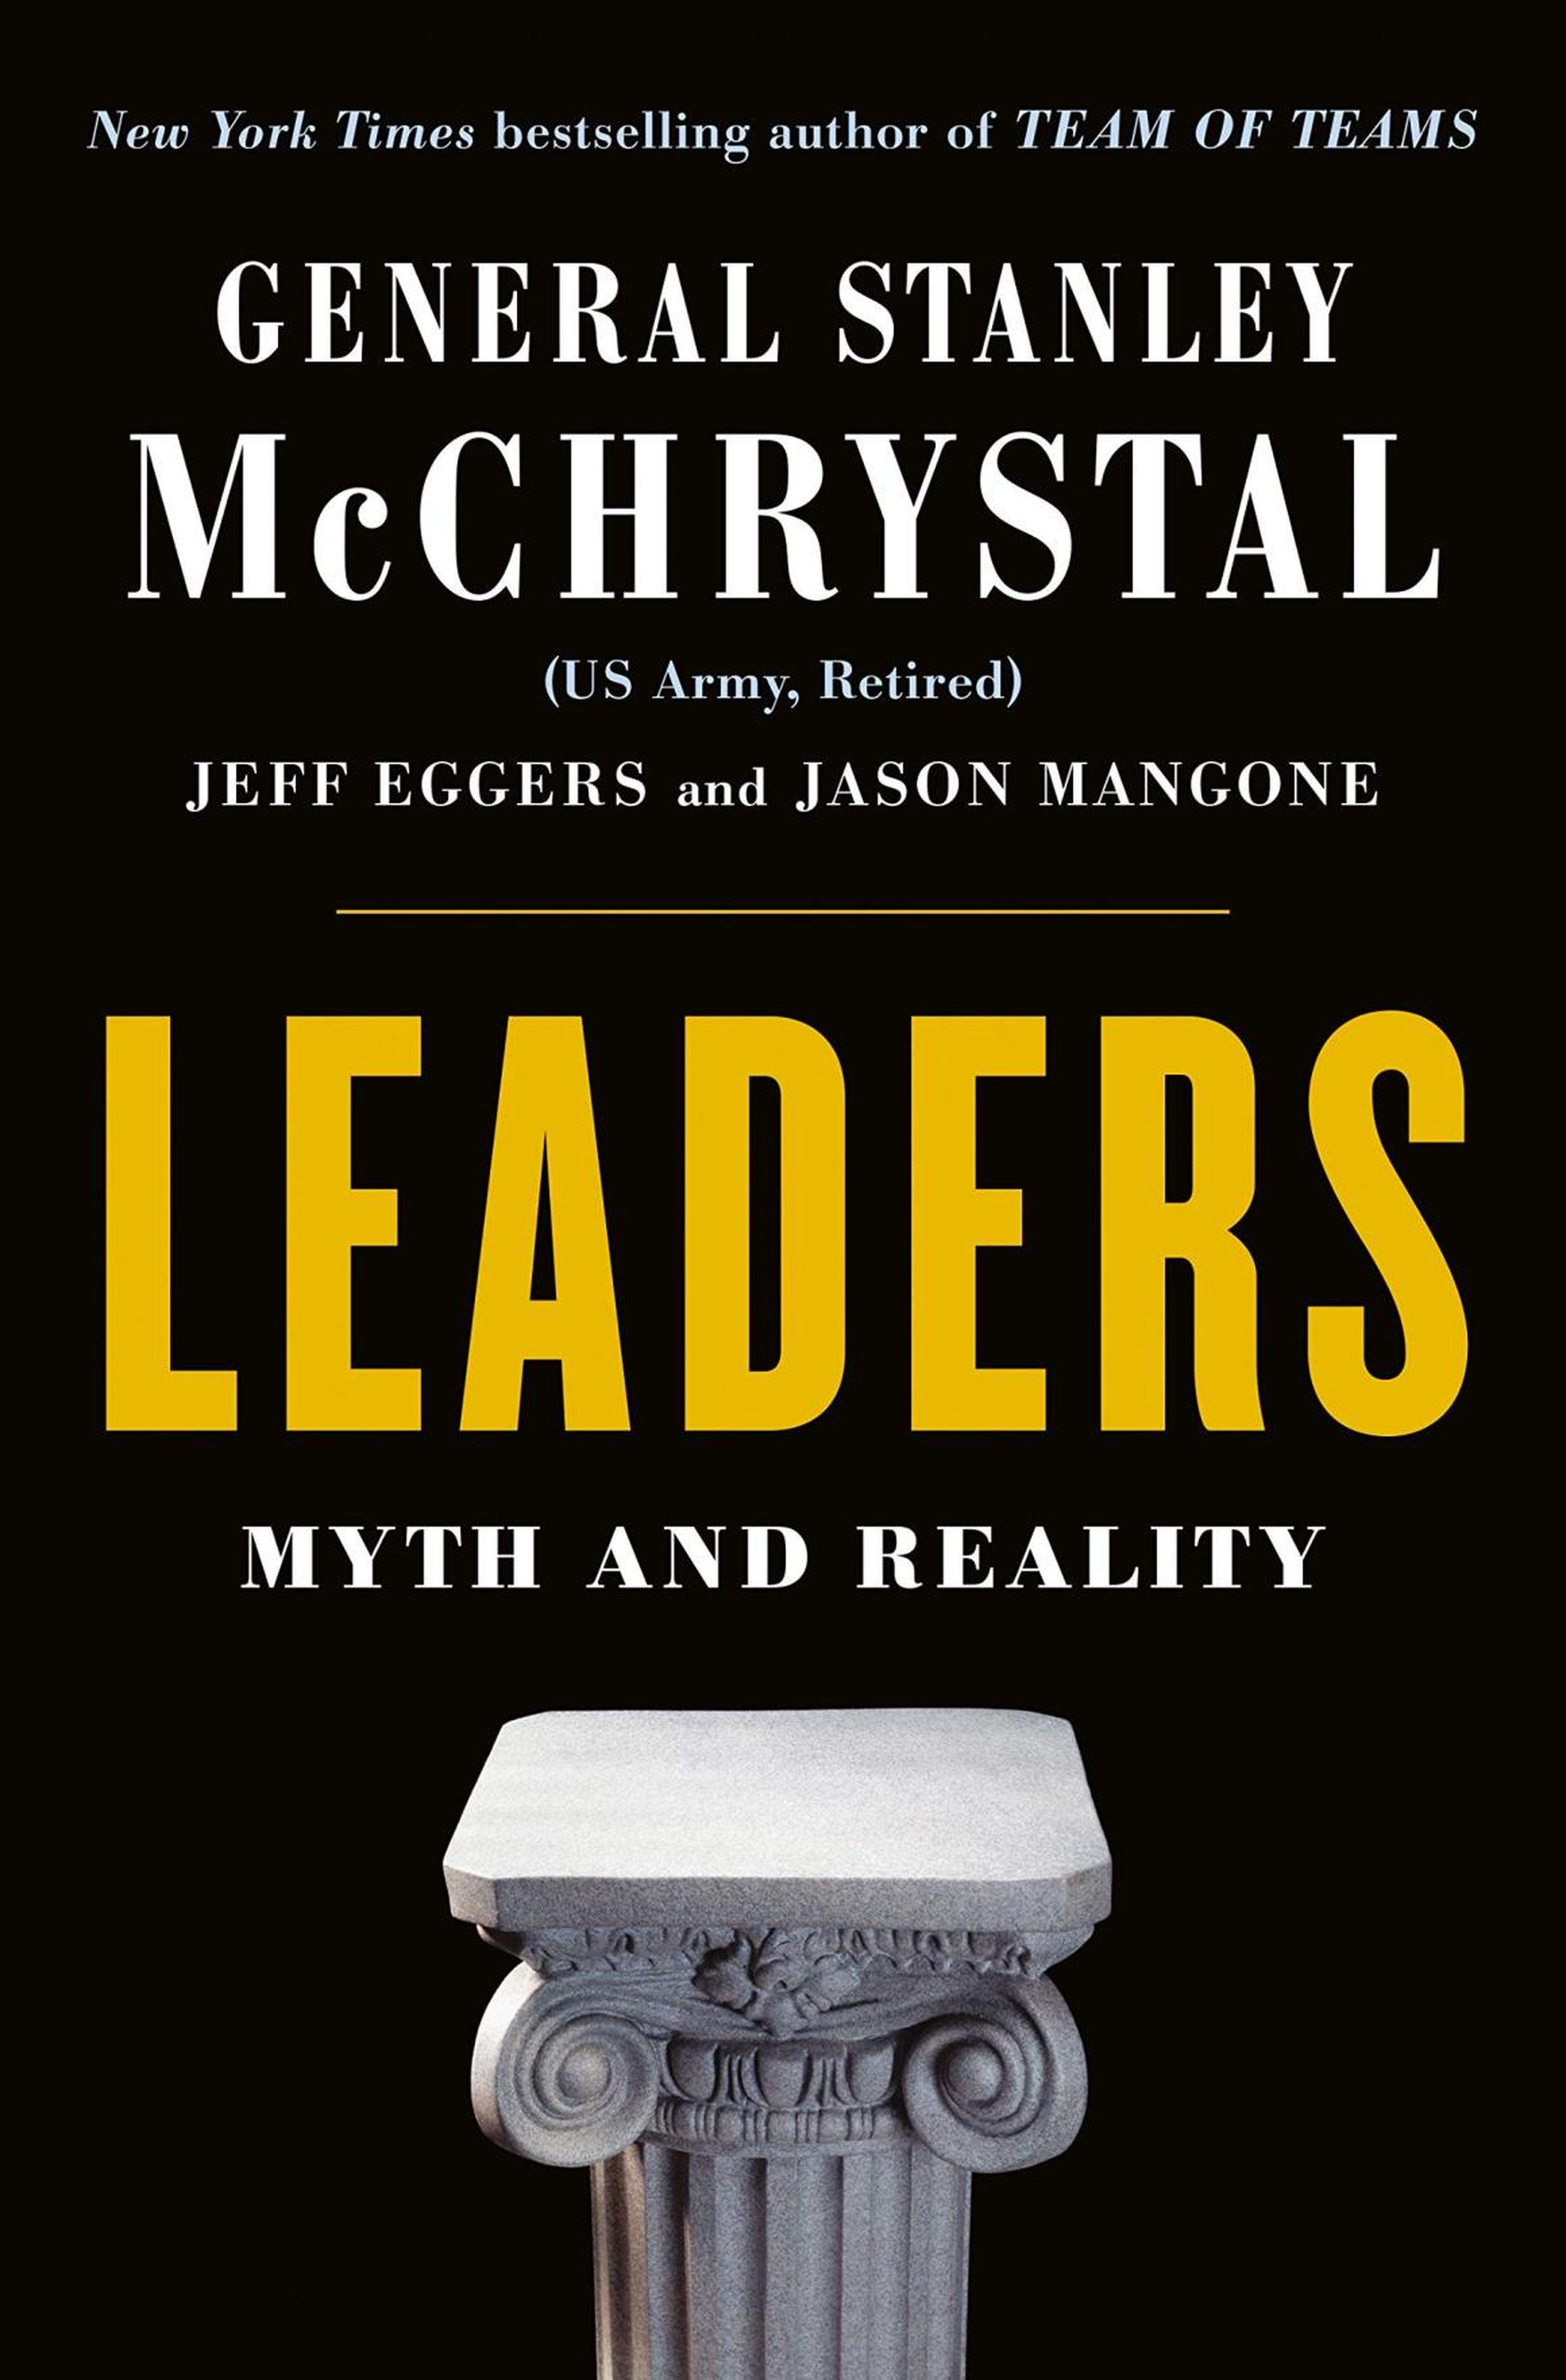 McChrystal coauthored "Leaders" with Jeff Eggers, the head of the McChrystal Group's Leadership Institute, and Jason Mangone, the director of the Franklin Project at the Aspen Institute.